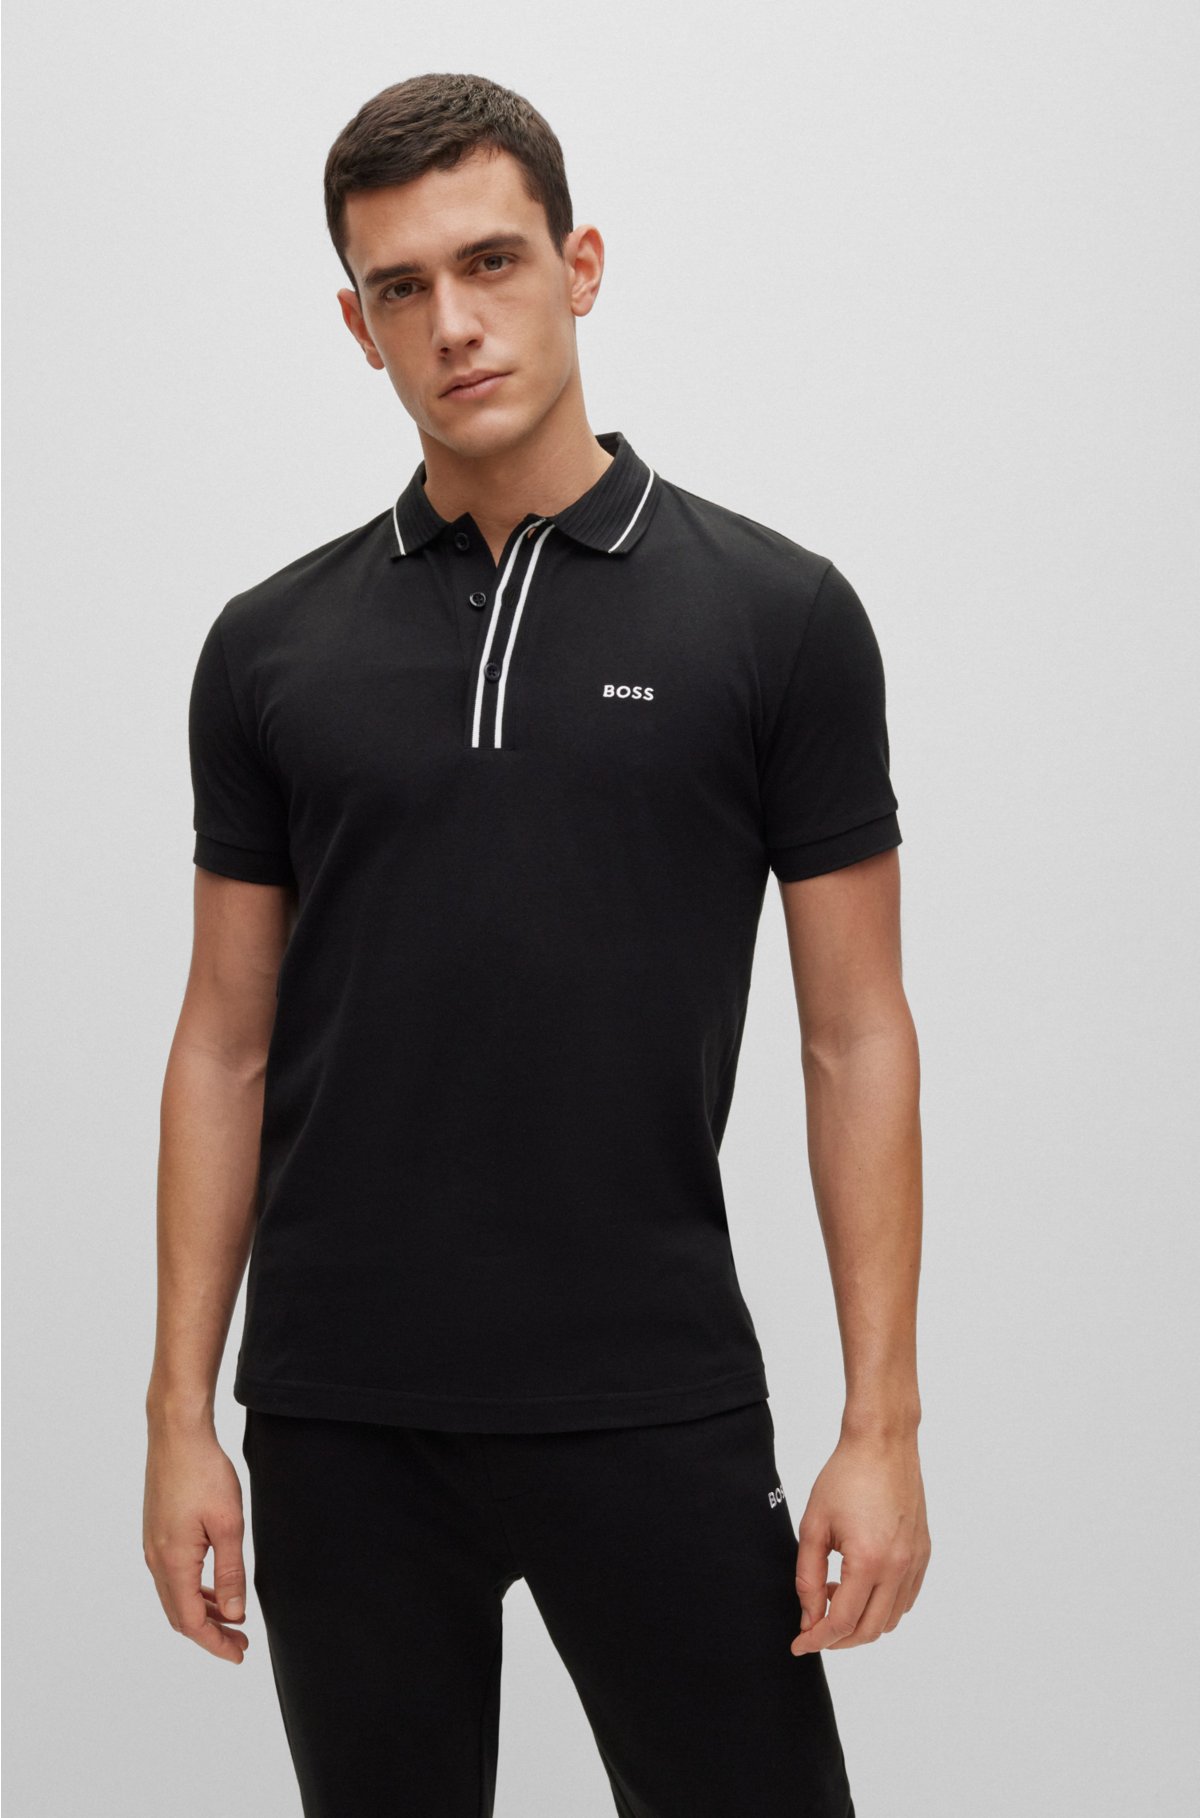 stripes - logo contrast polo and Cotton-jersey shirt BOSS with